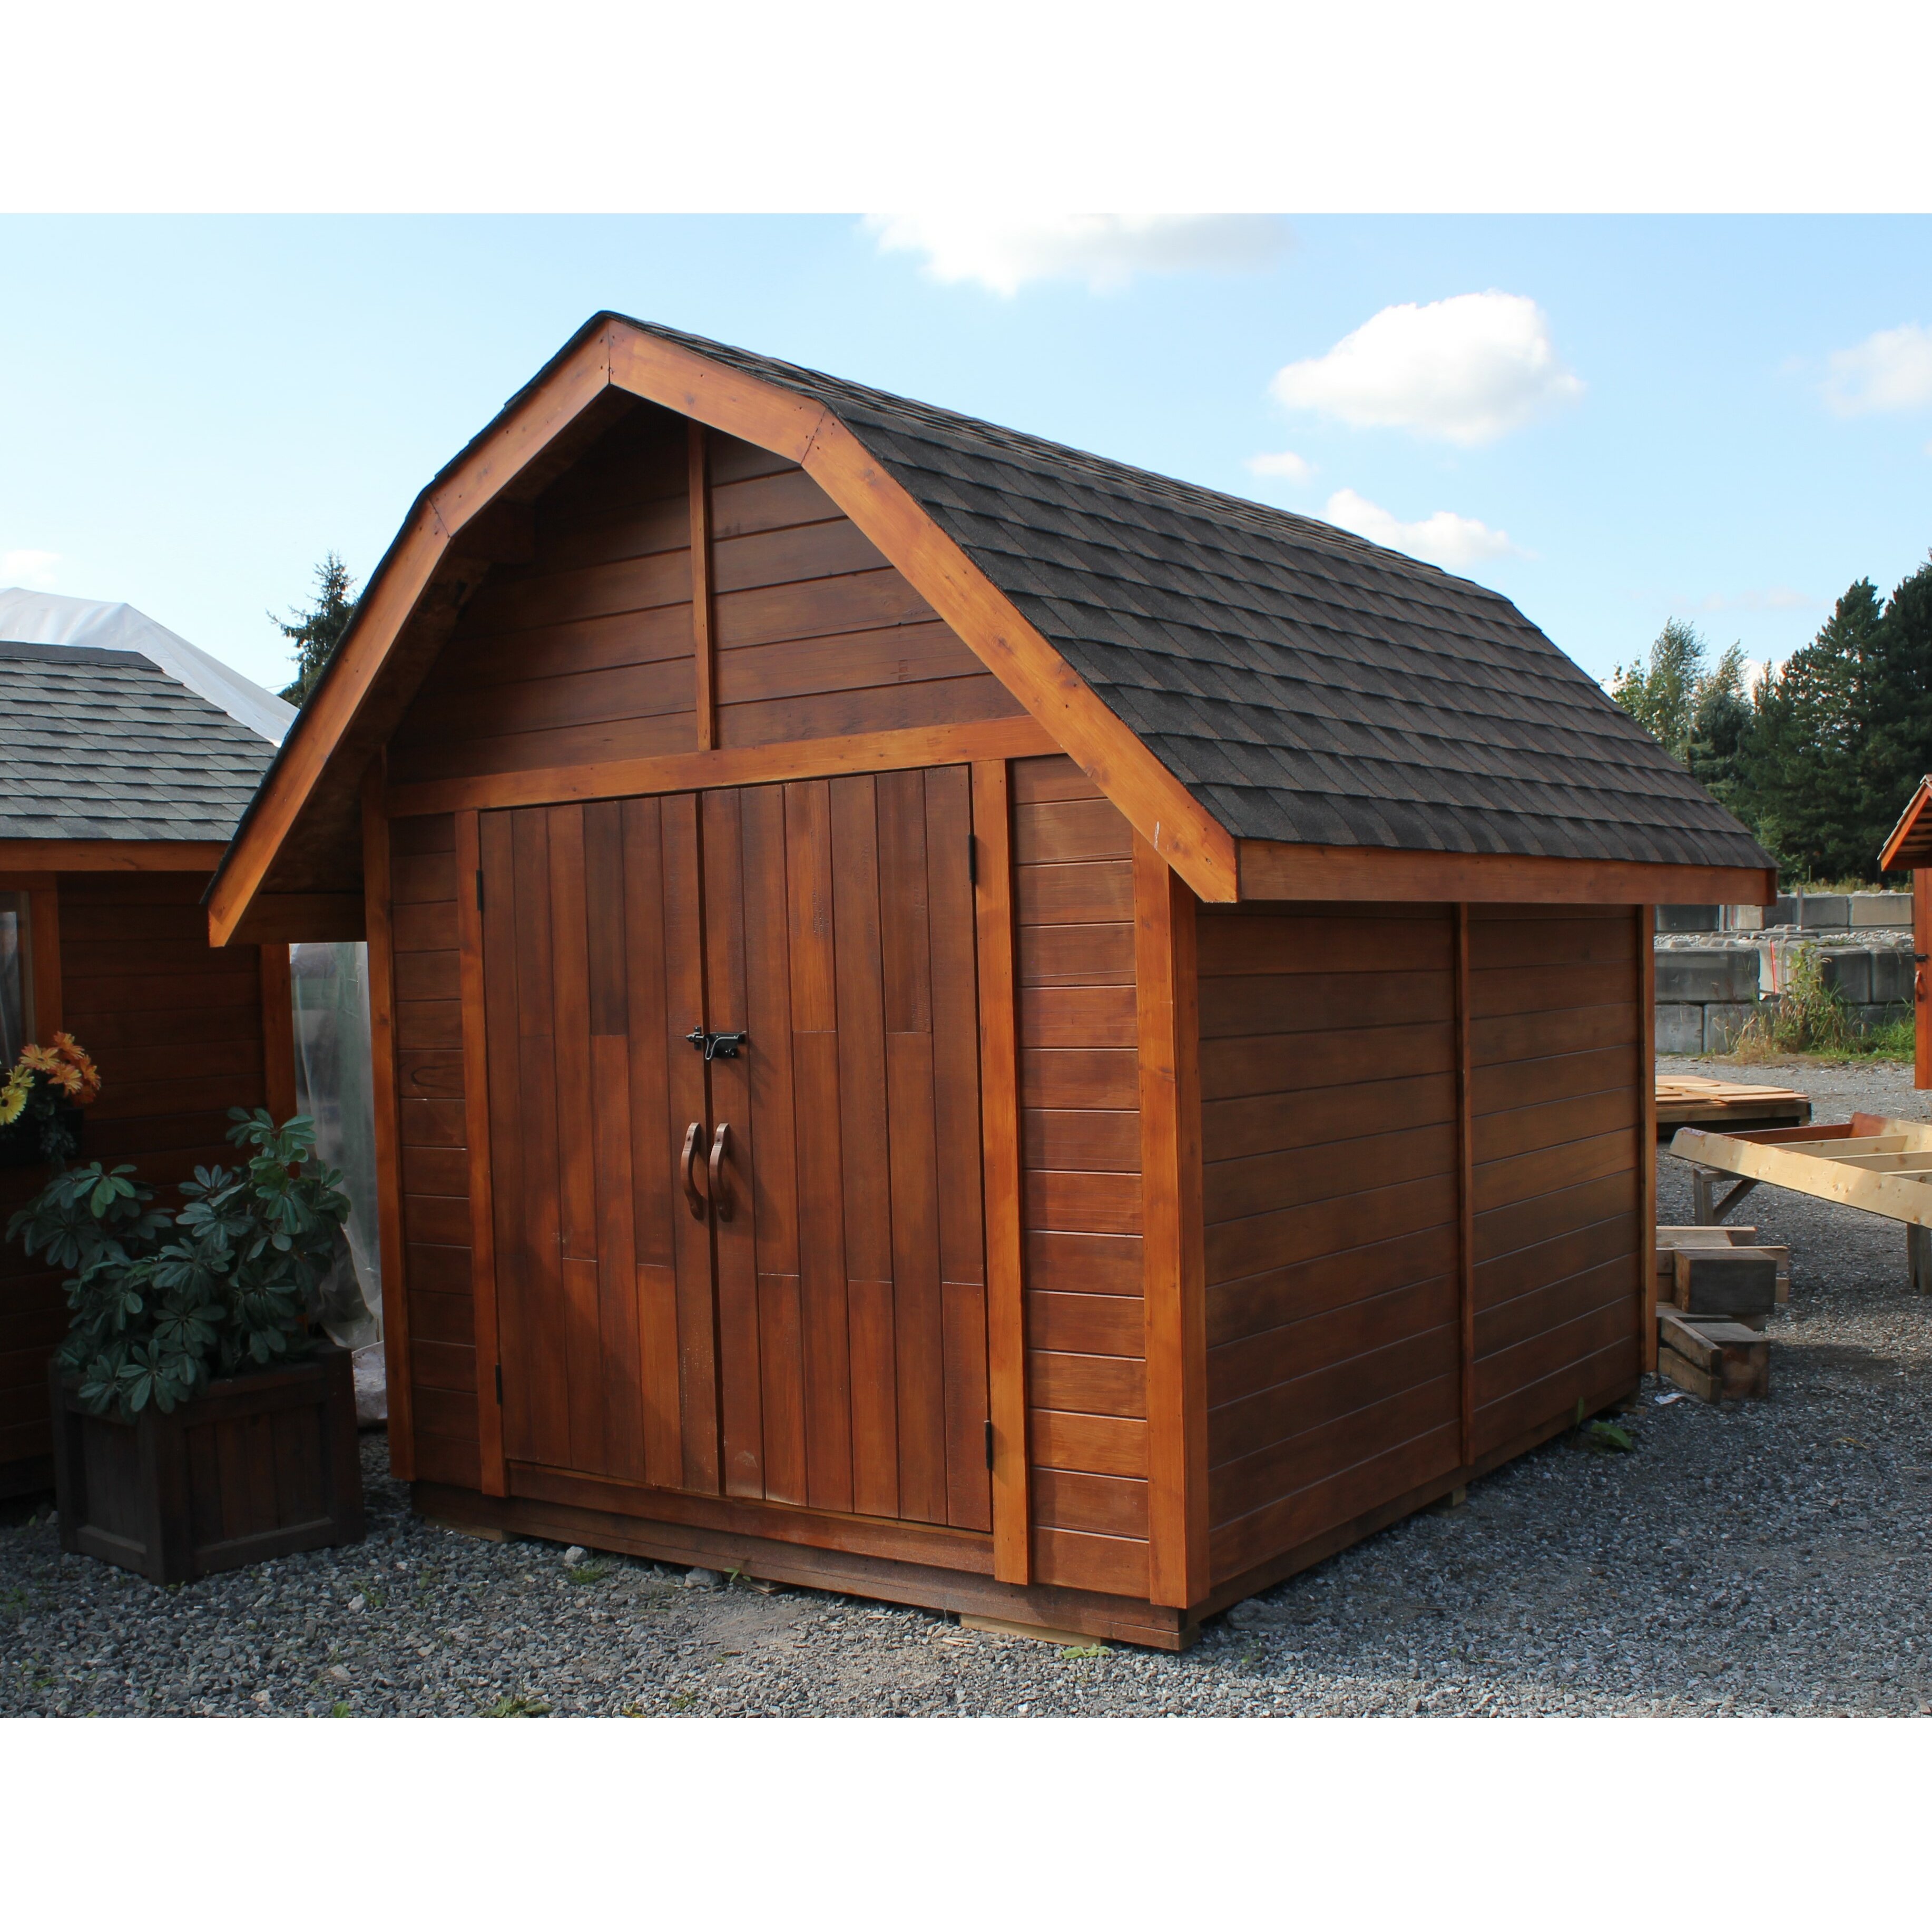 Outdoor Outdoor Storage Sheds WestviewManufacturing SKU: WSVM1008